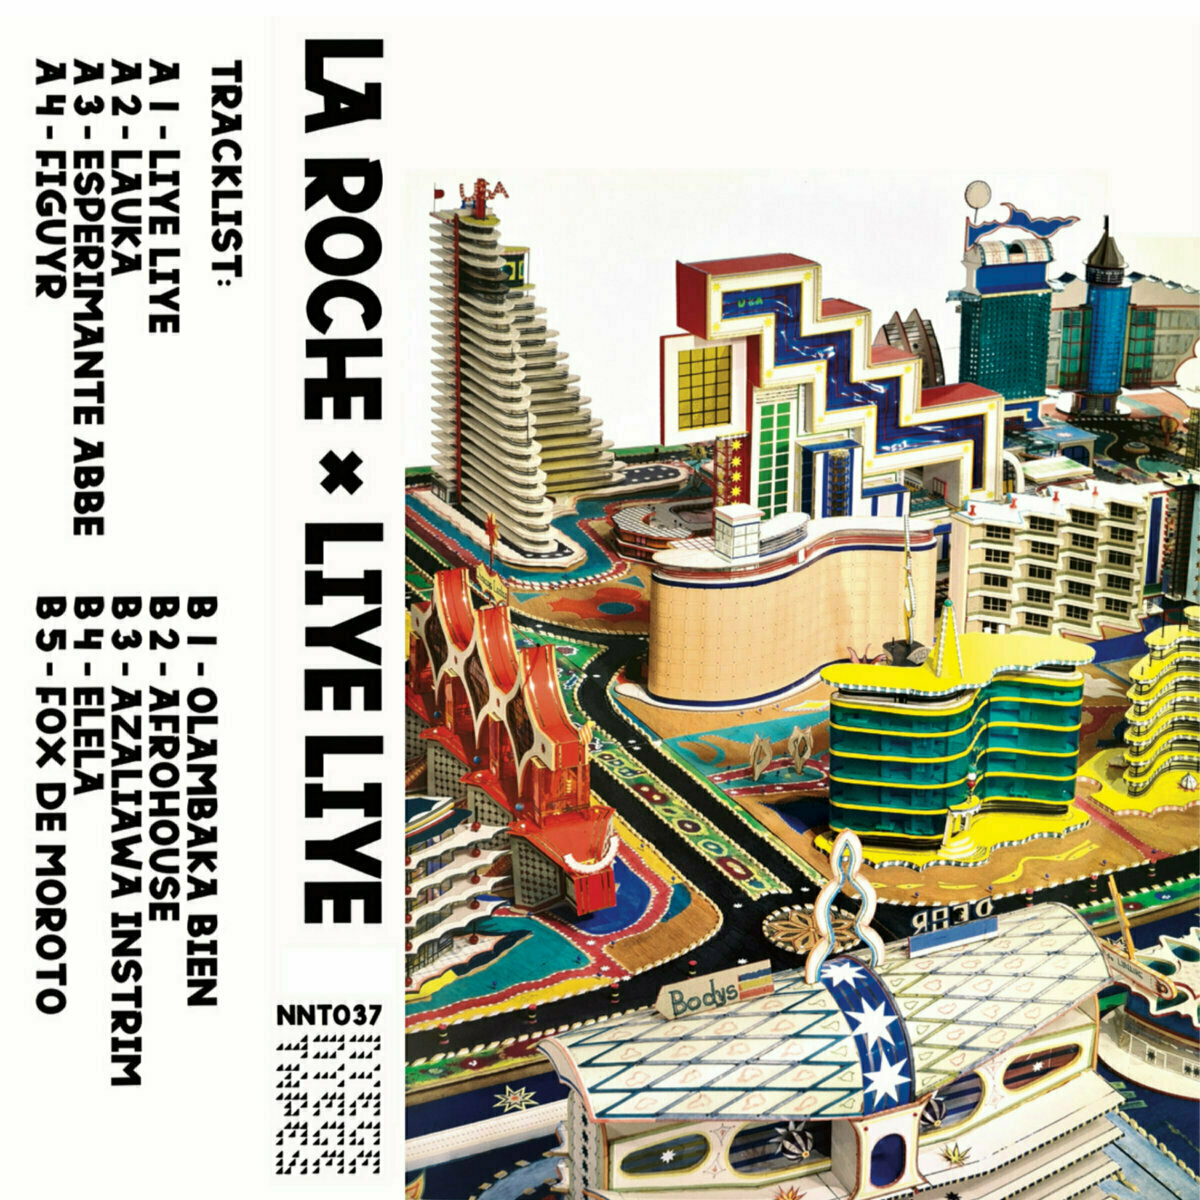 Cassette cover art photo of Bodys Isek Kingelez cityscape installation with tracklisting